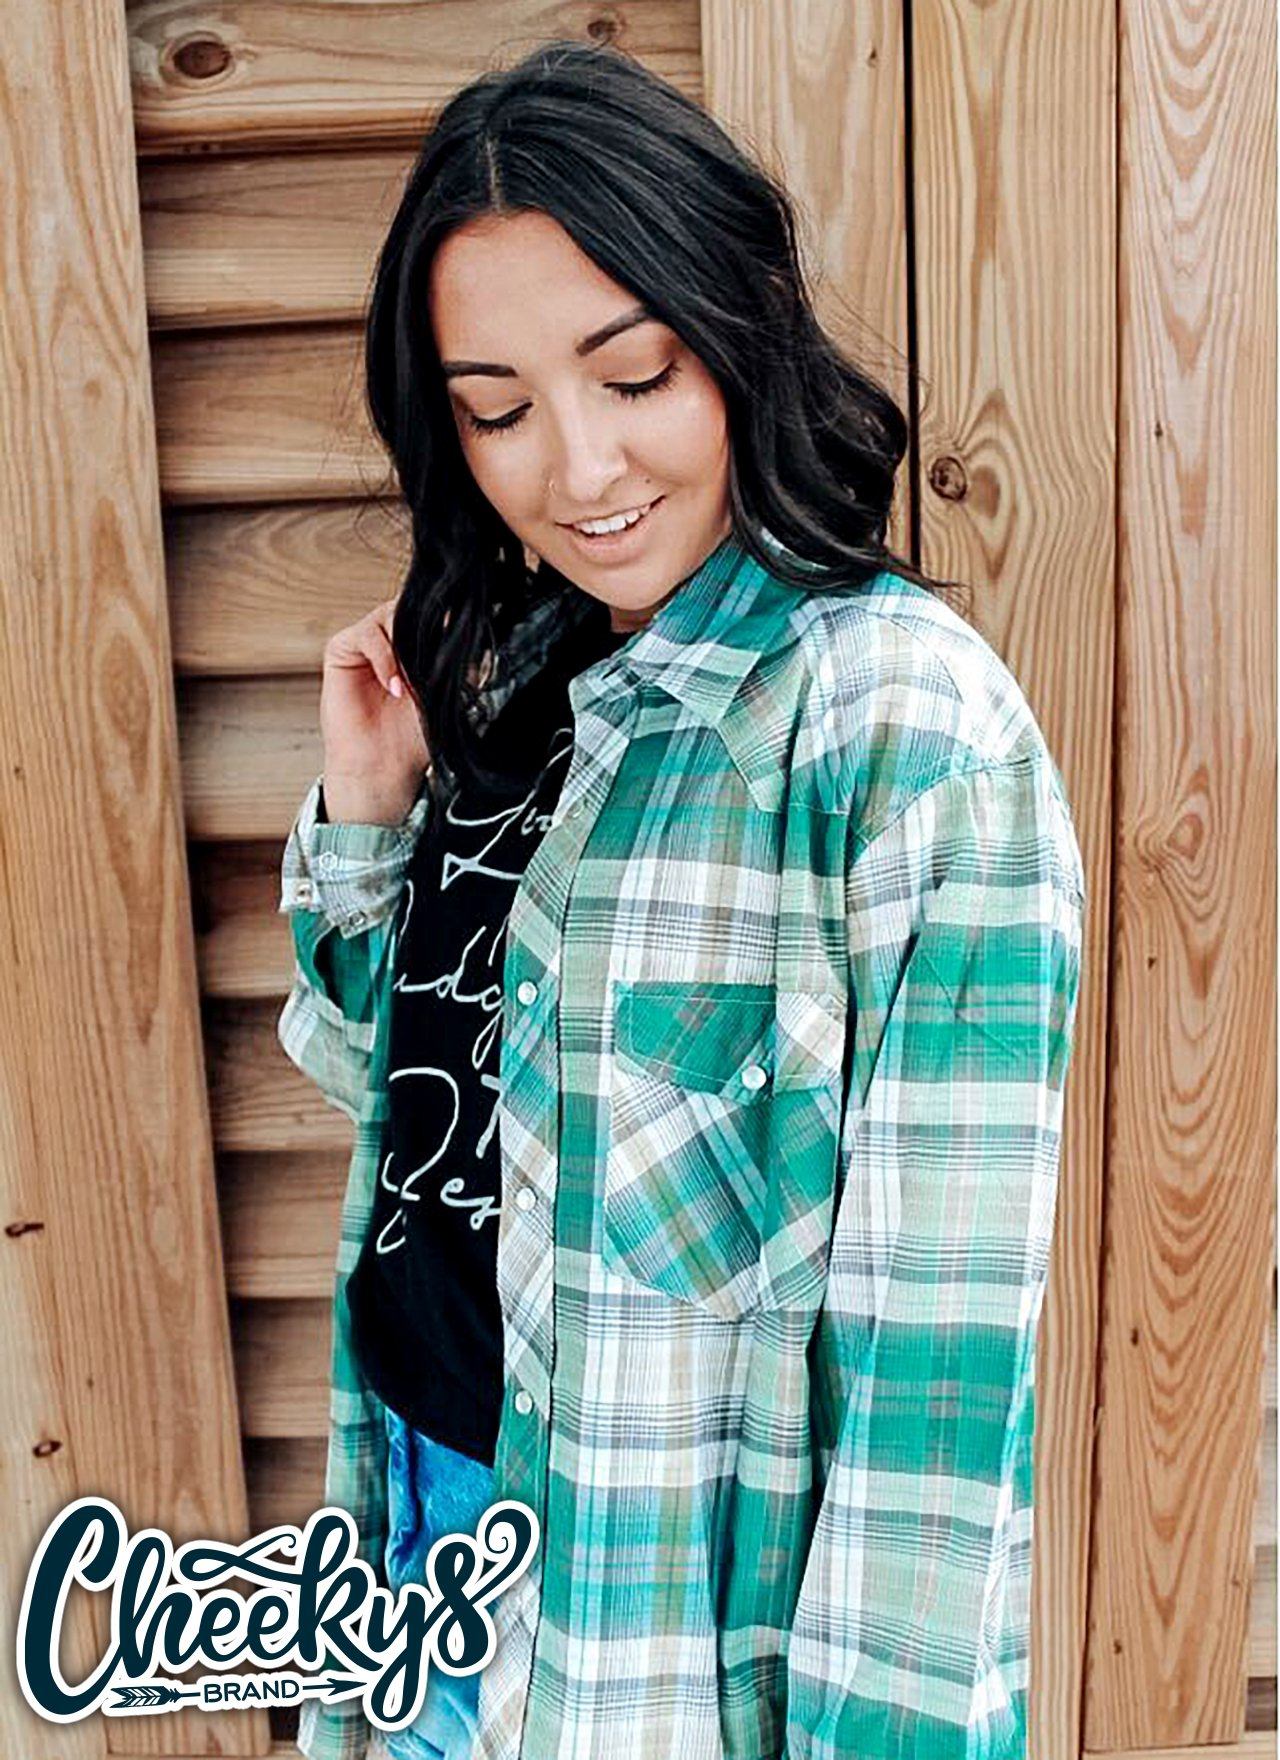 Let There Be Cowgirls Green Plaid Button-Up Western Shirt Cheekys Brand 